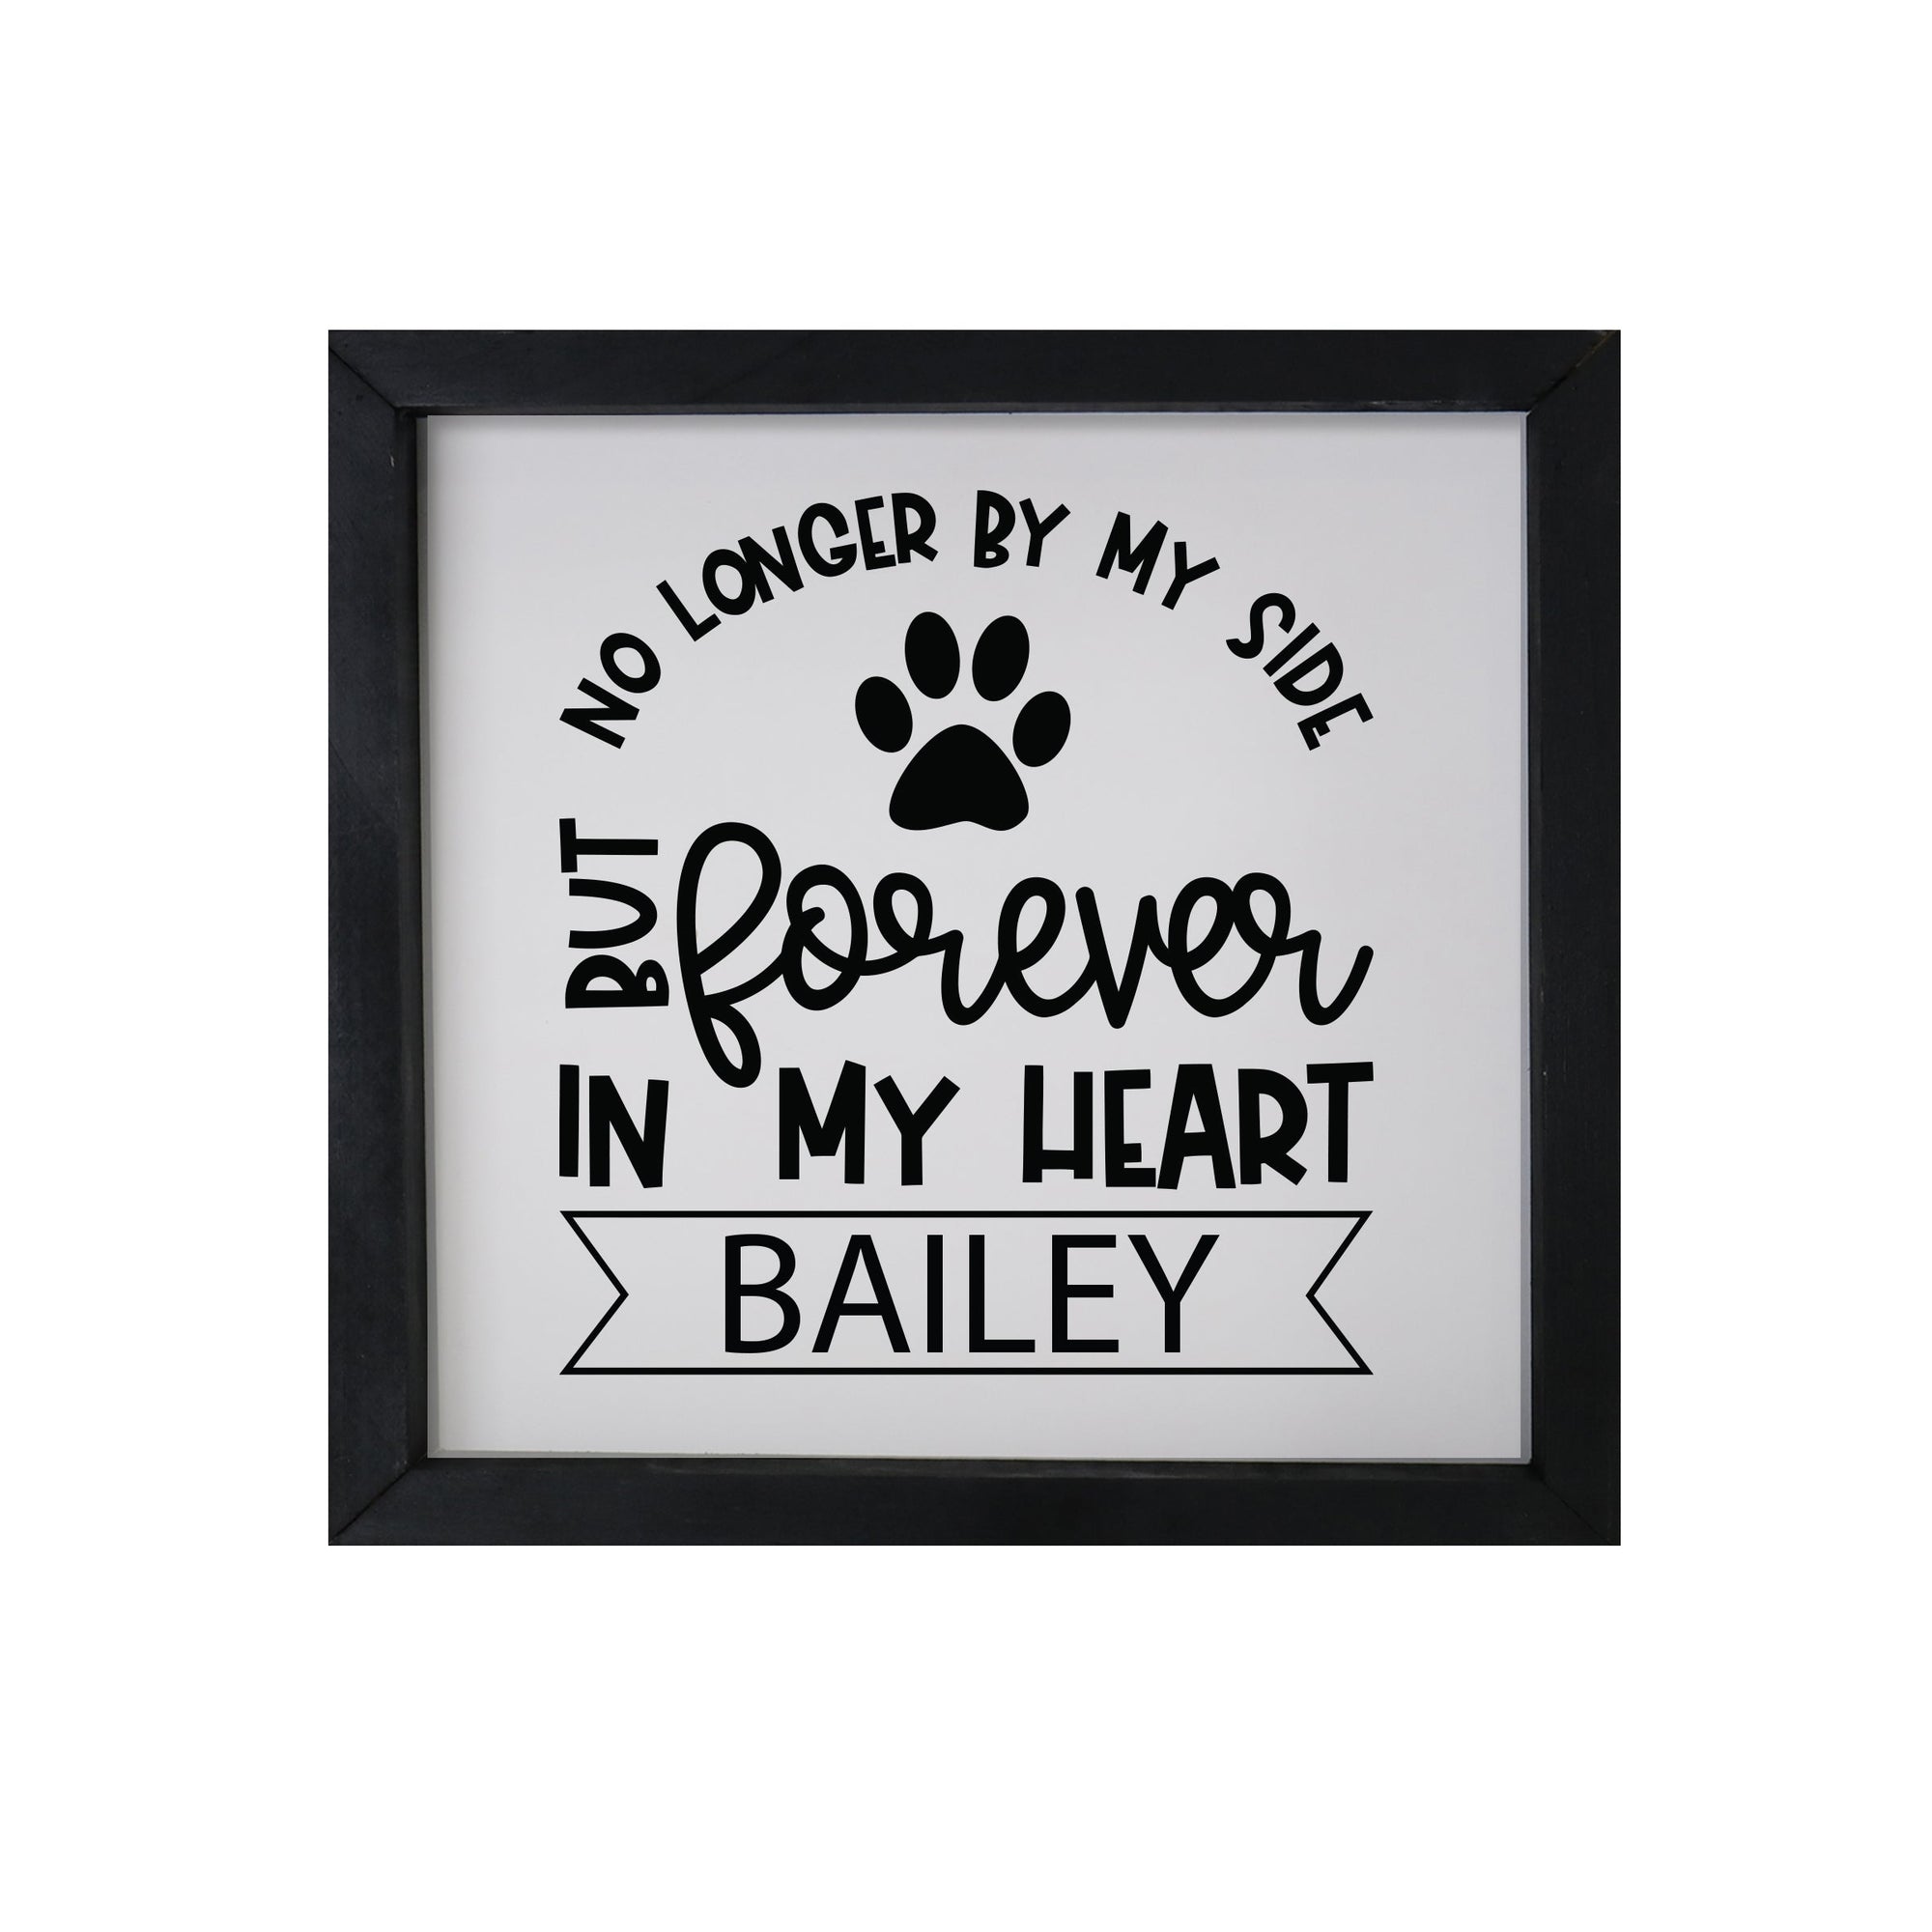 11.5x11.5 Black Framed Pet Memorial Shadow Box with phrase "No Longer By My Side"